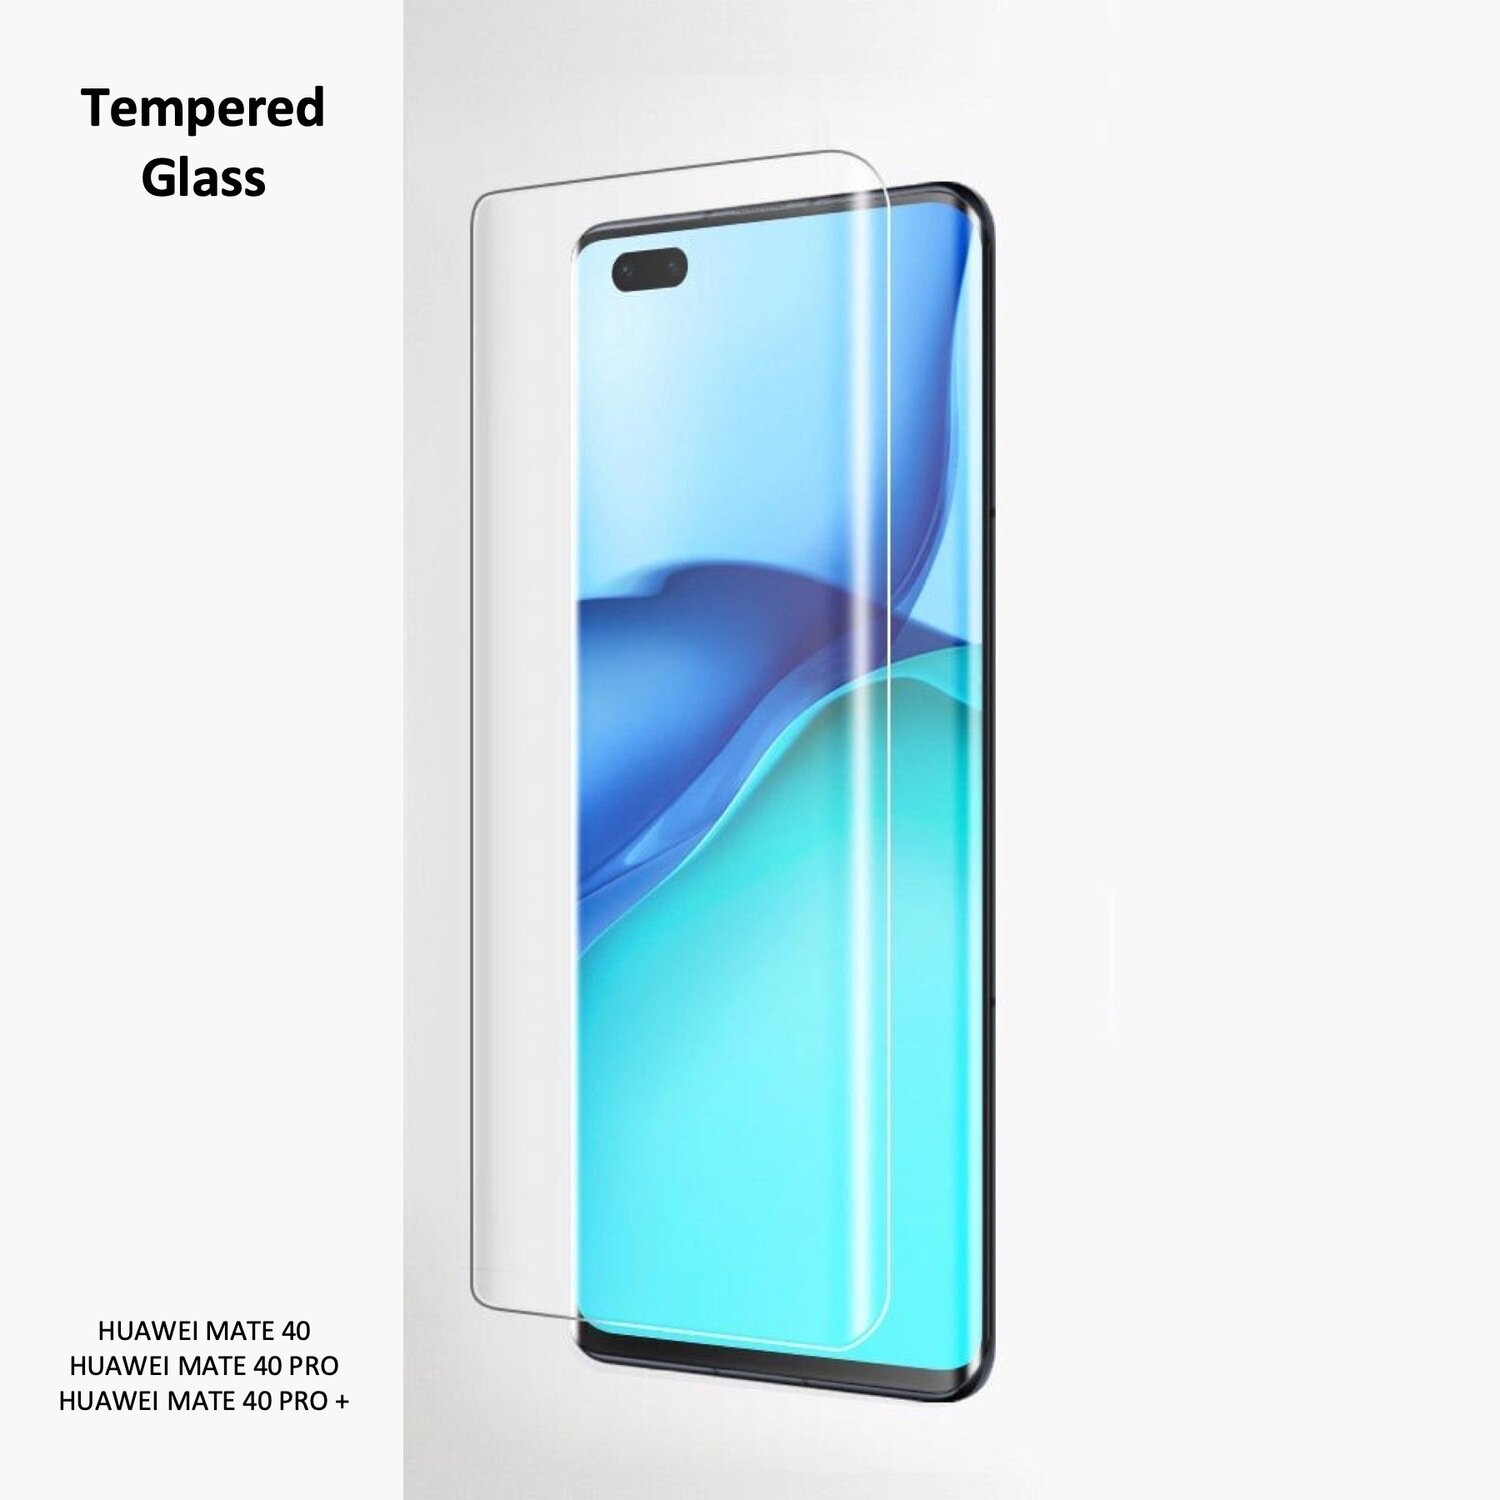 Komass Huawei Mate 40 Pro Tempered Glass, 3D UV Clear (Screen Protector)